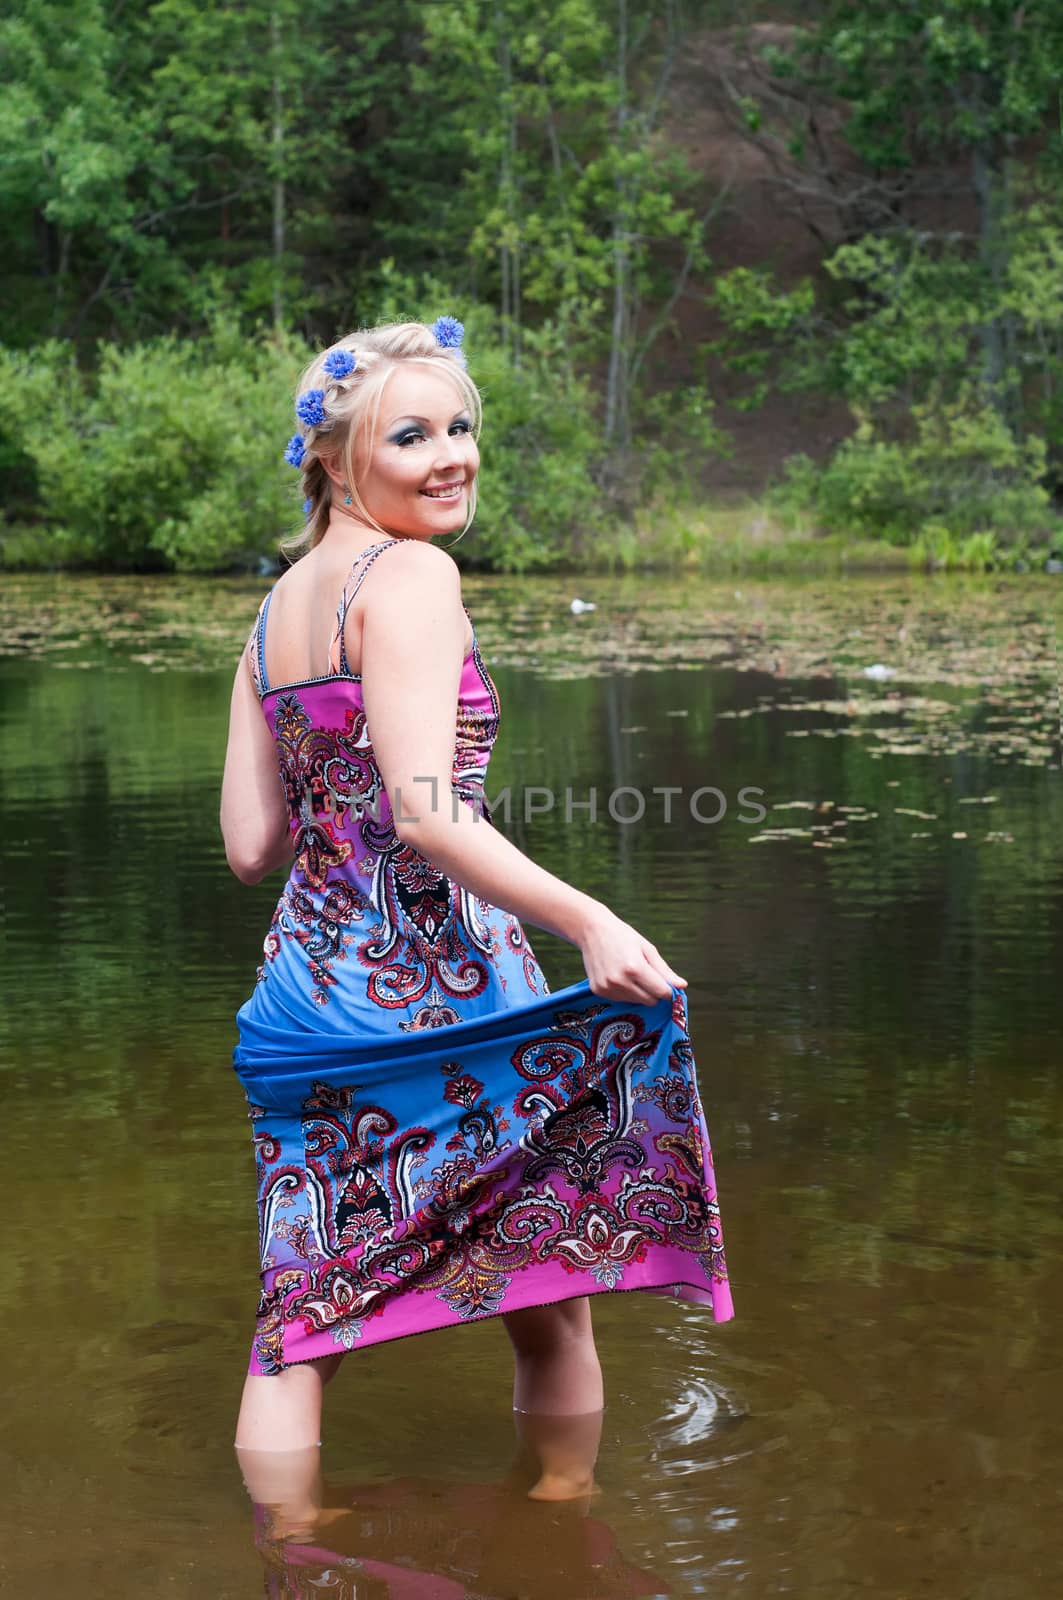 Beautiful woman standing in pond by anytka